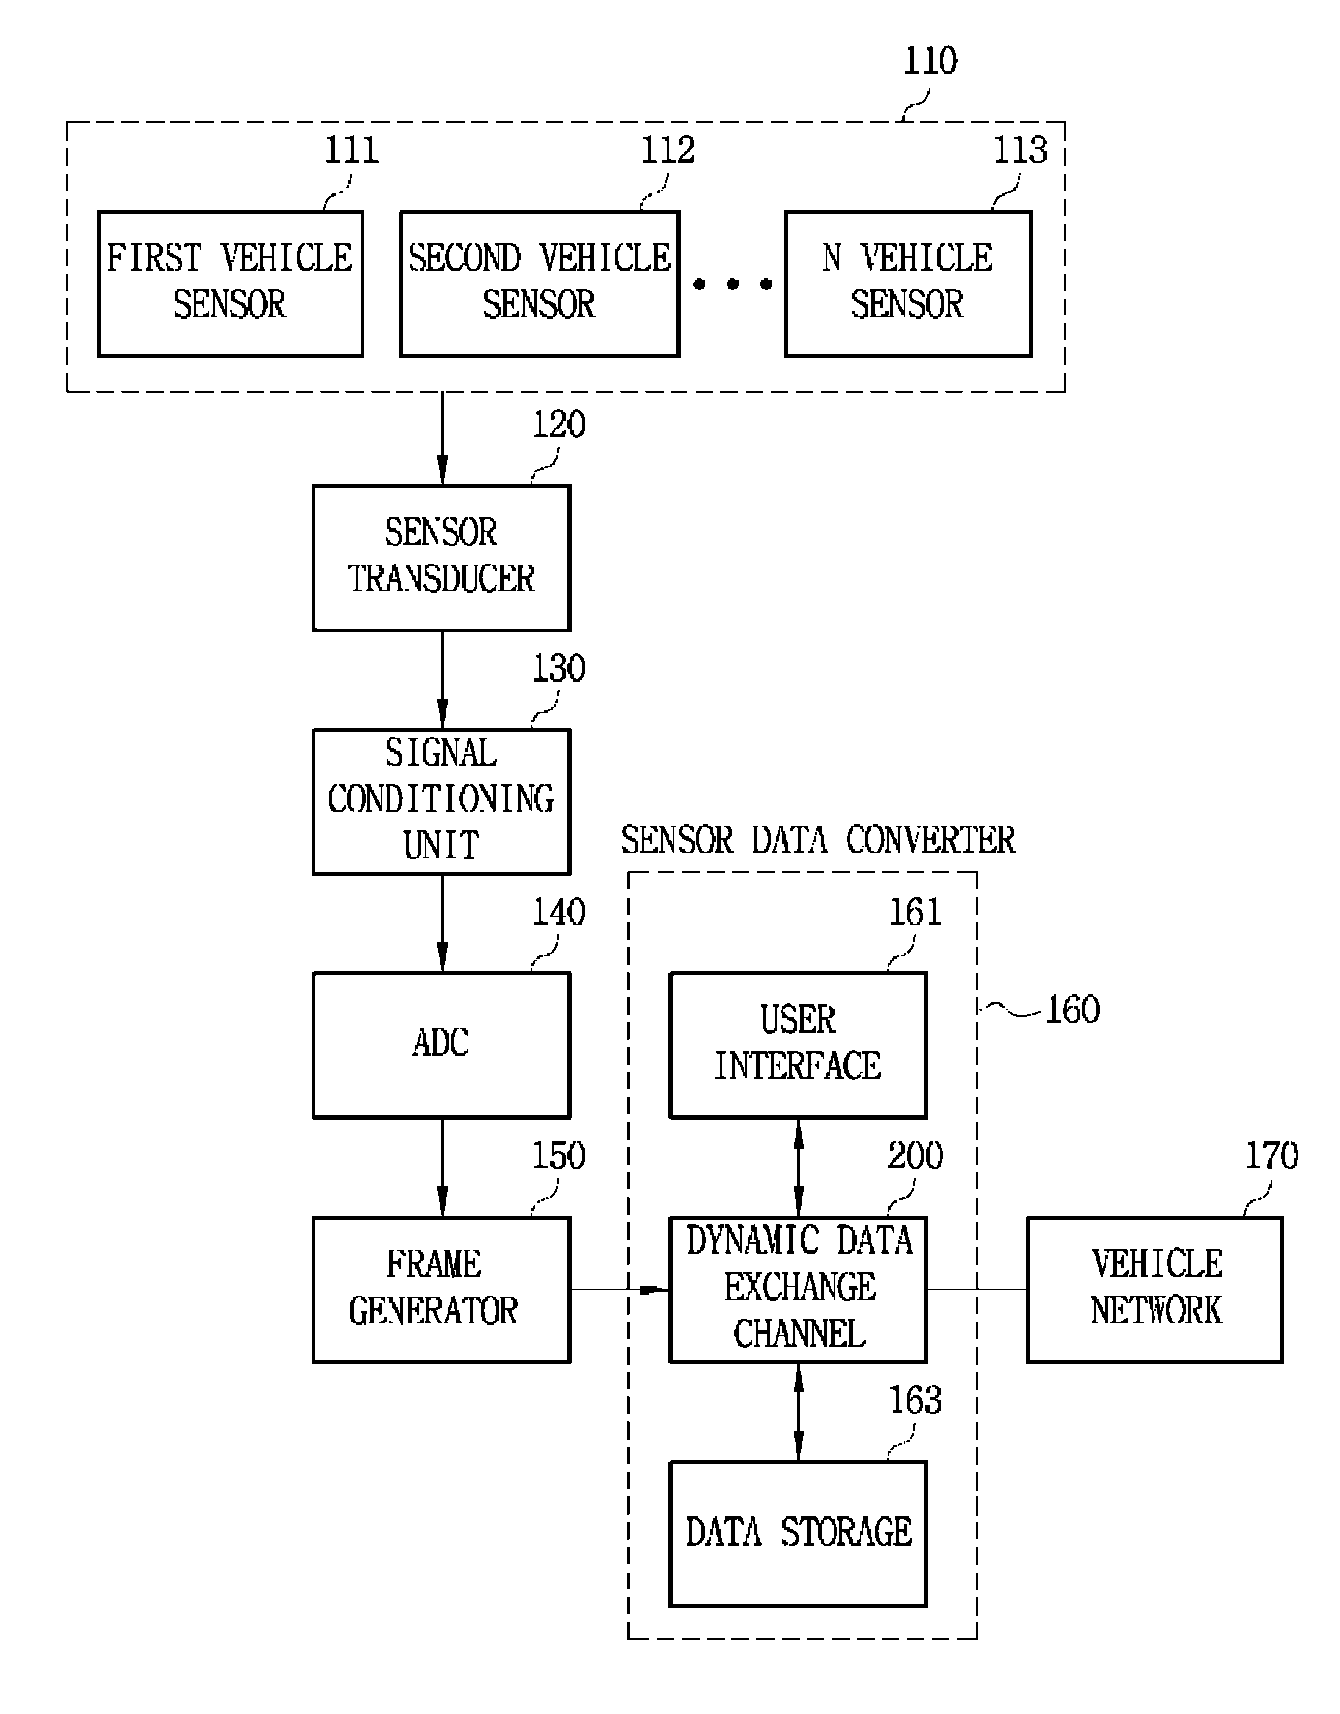 Apparatus and method for processing sensor data for vehicle using extensible markup language